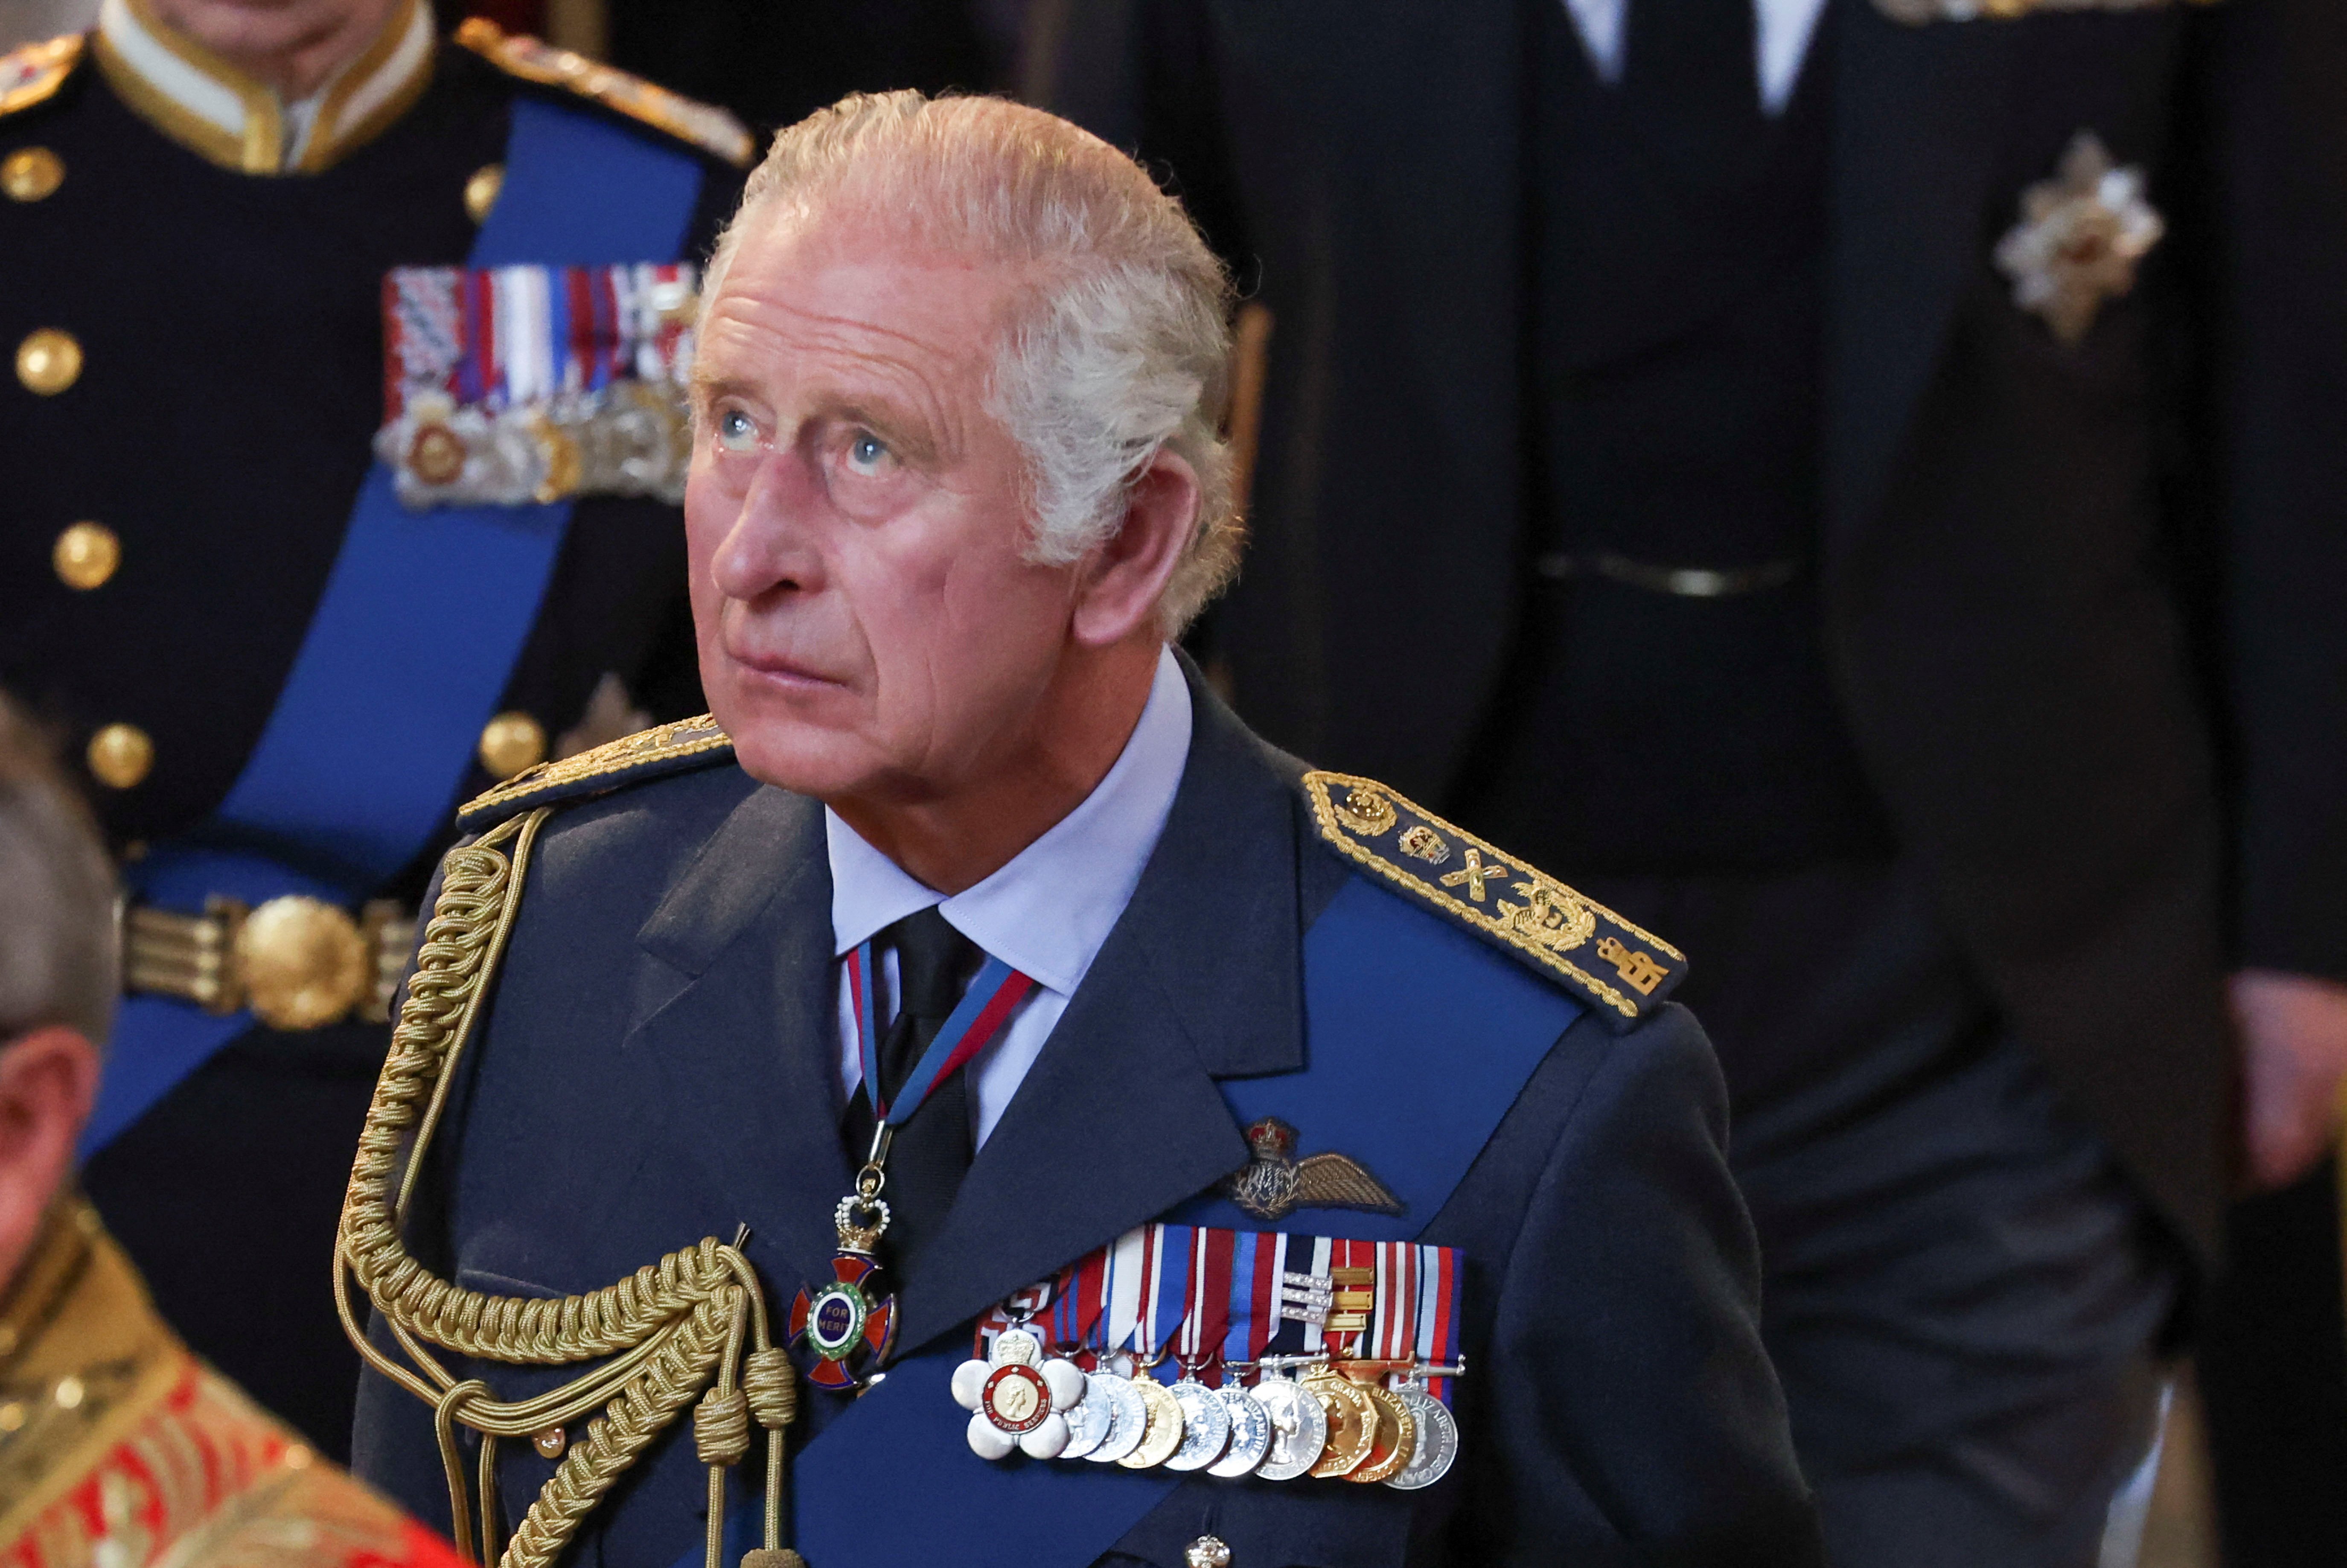 King Charles III at the Queen's precession in London 2022. | Source: Getty Images 